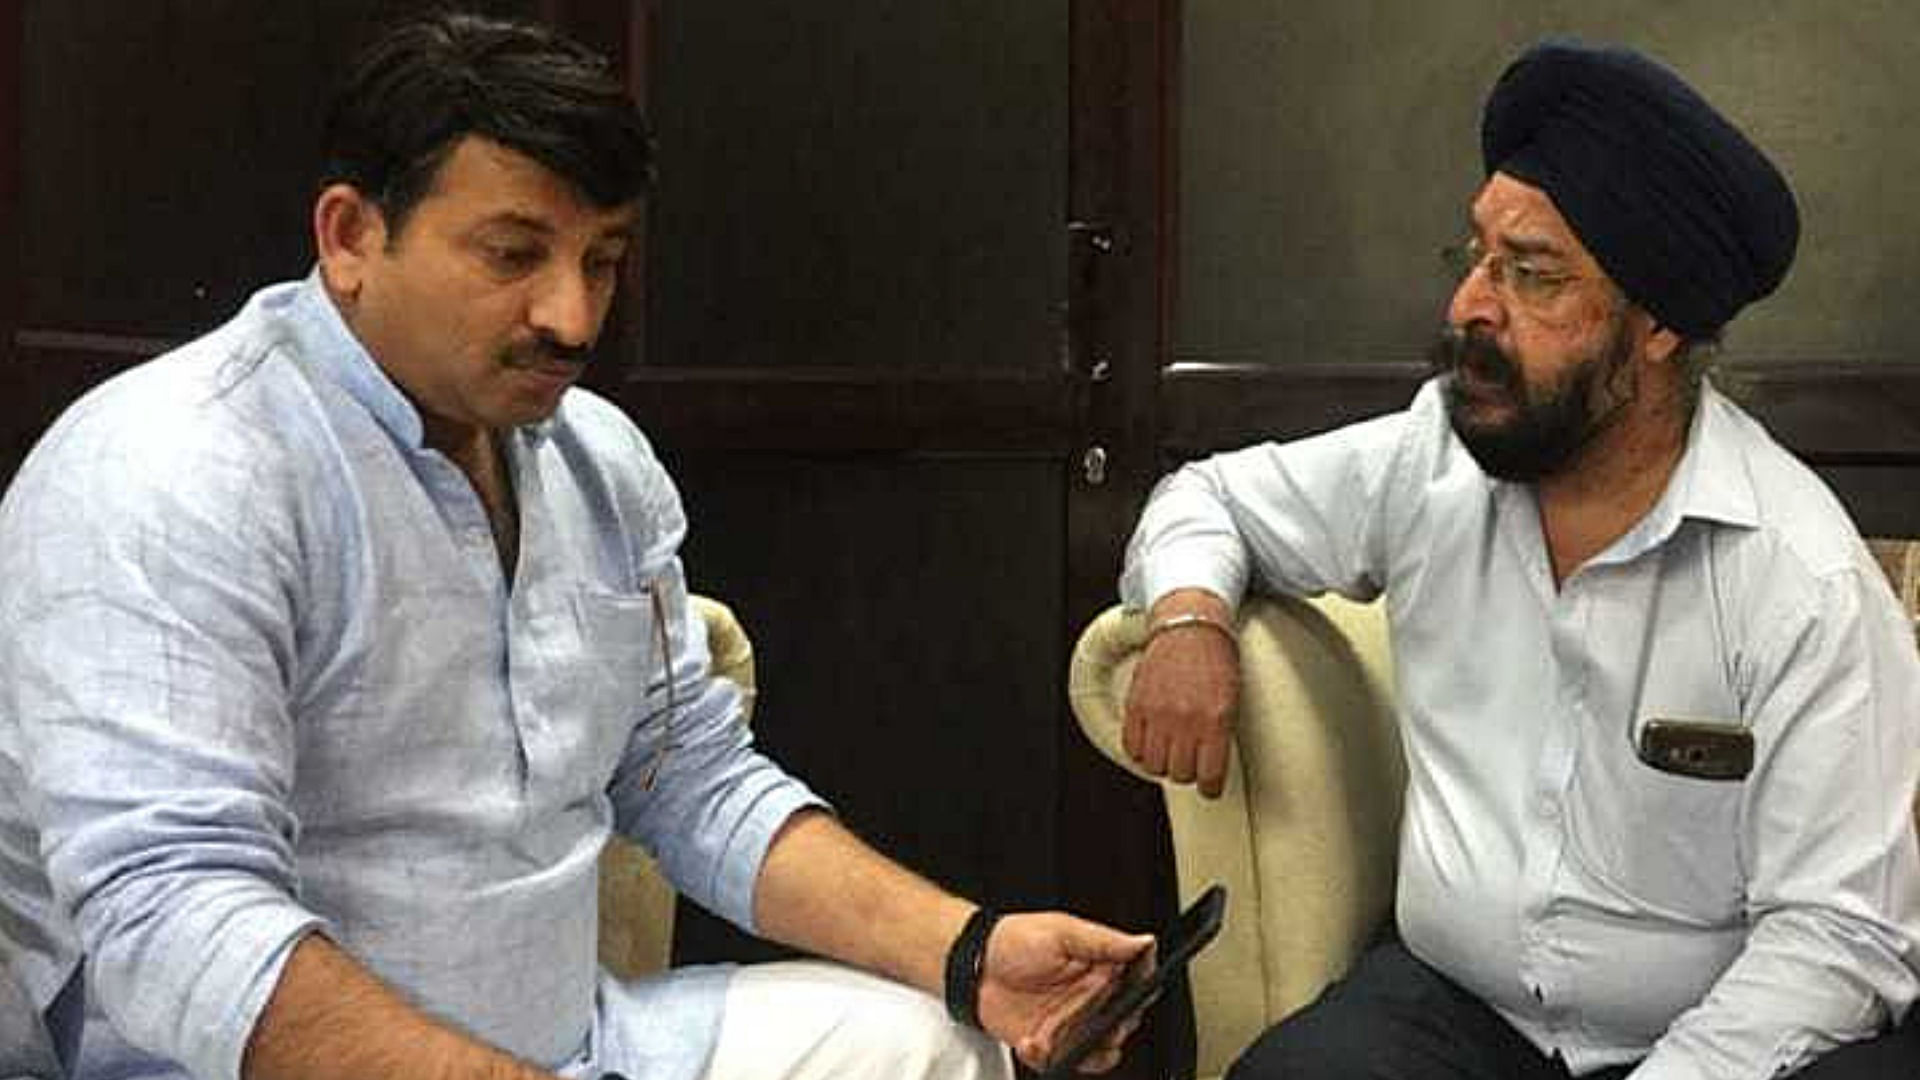 BS Vohra met with Manoj Tiwari to discuss the issue.